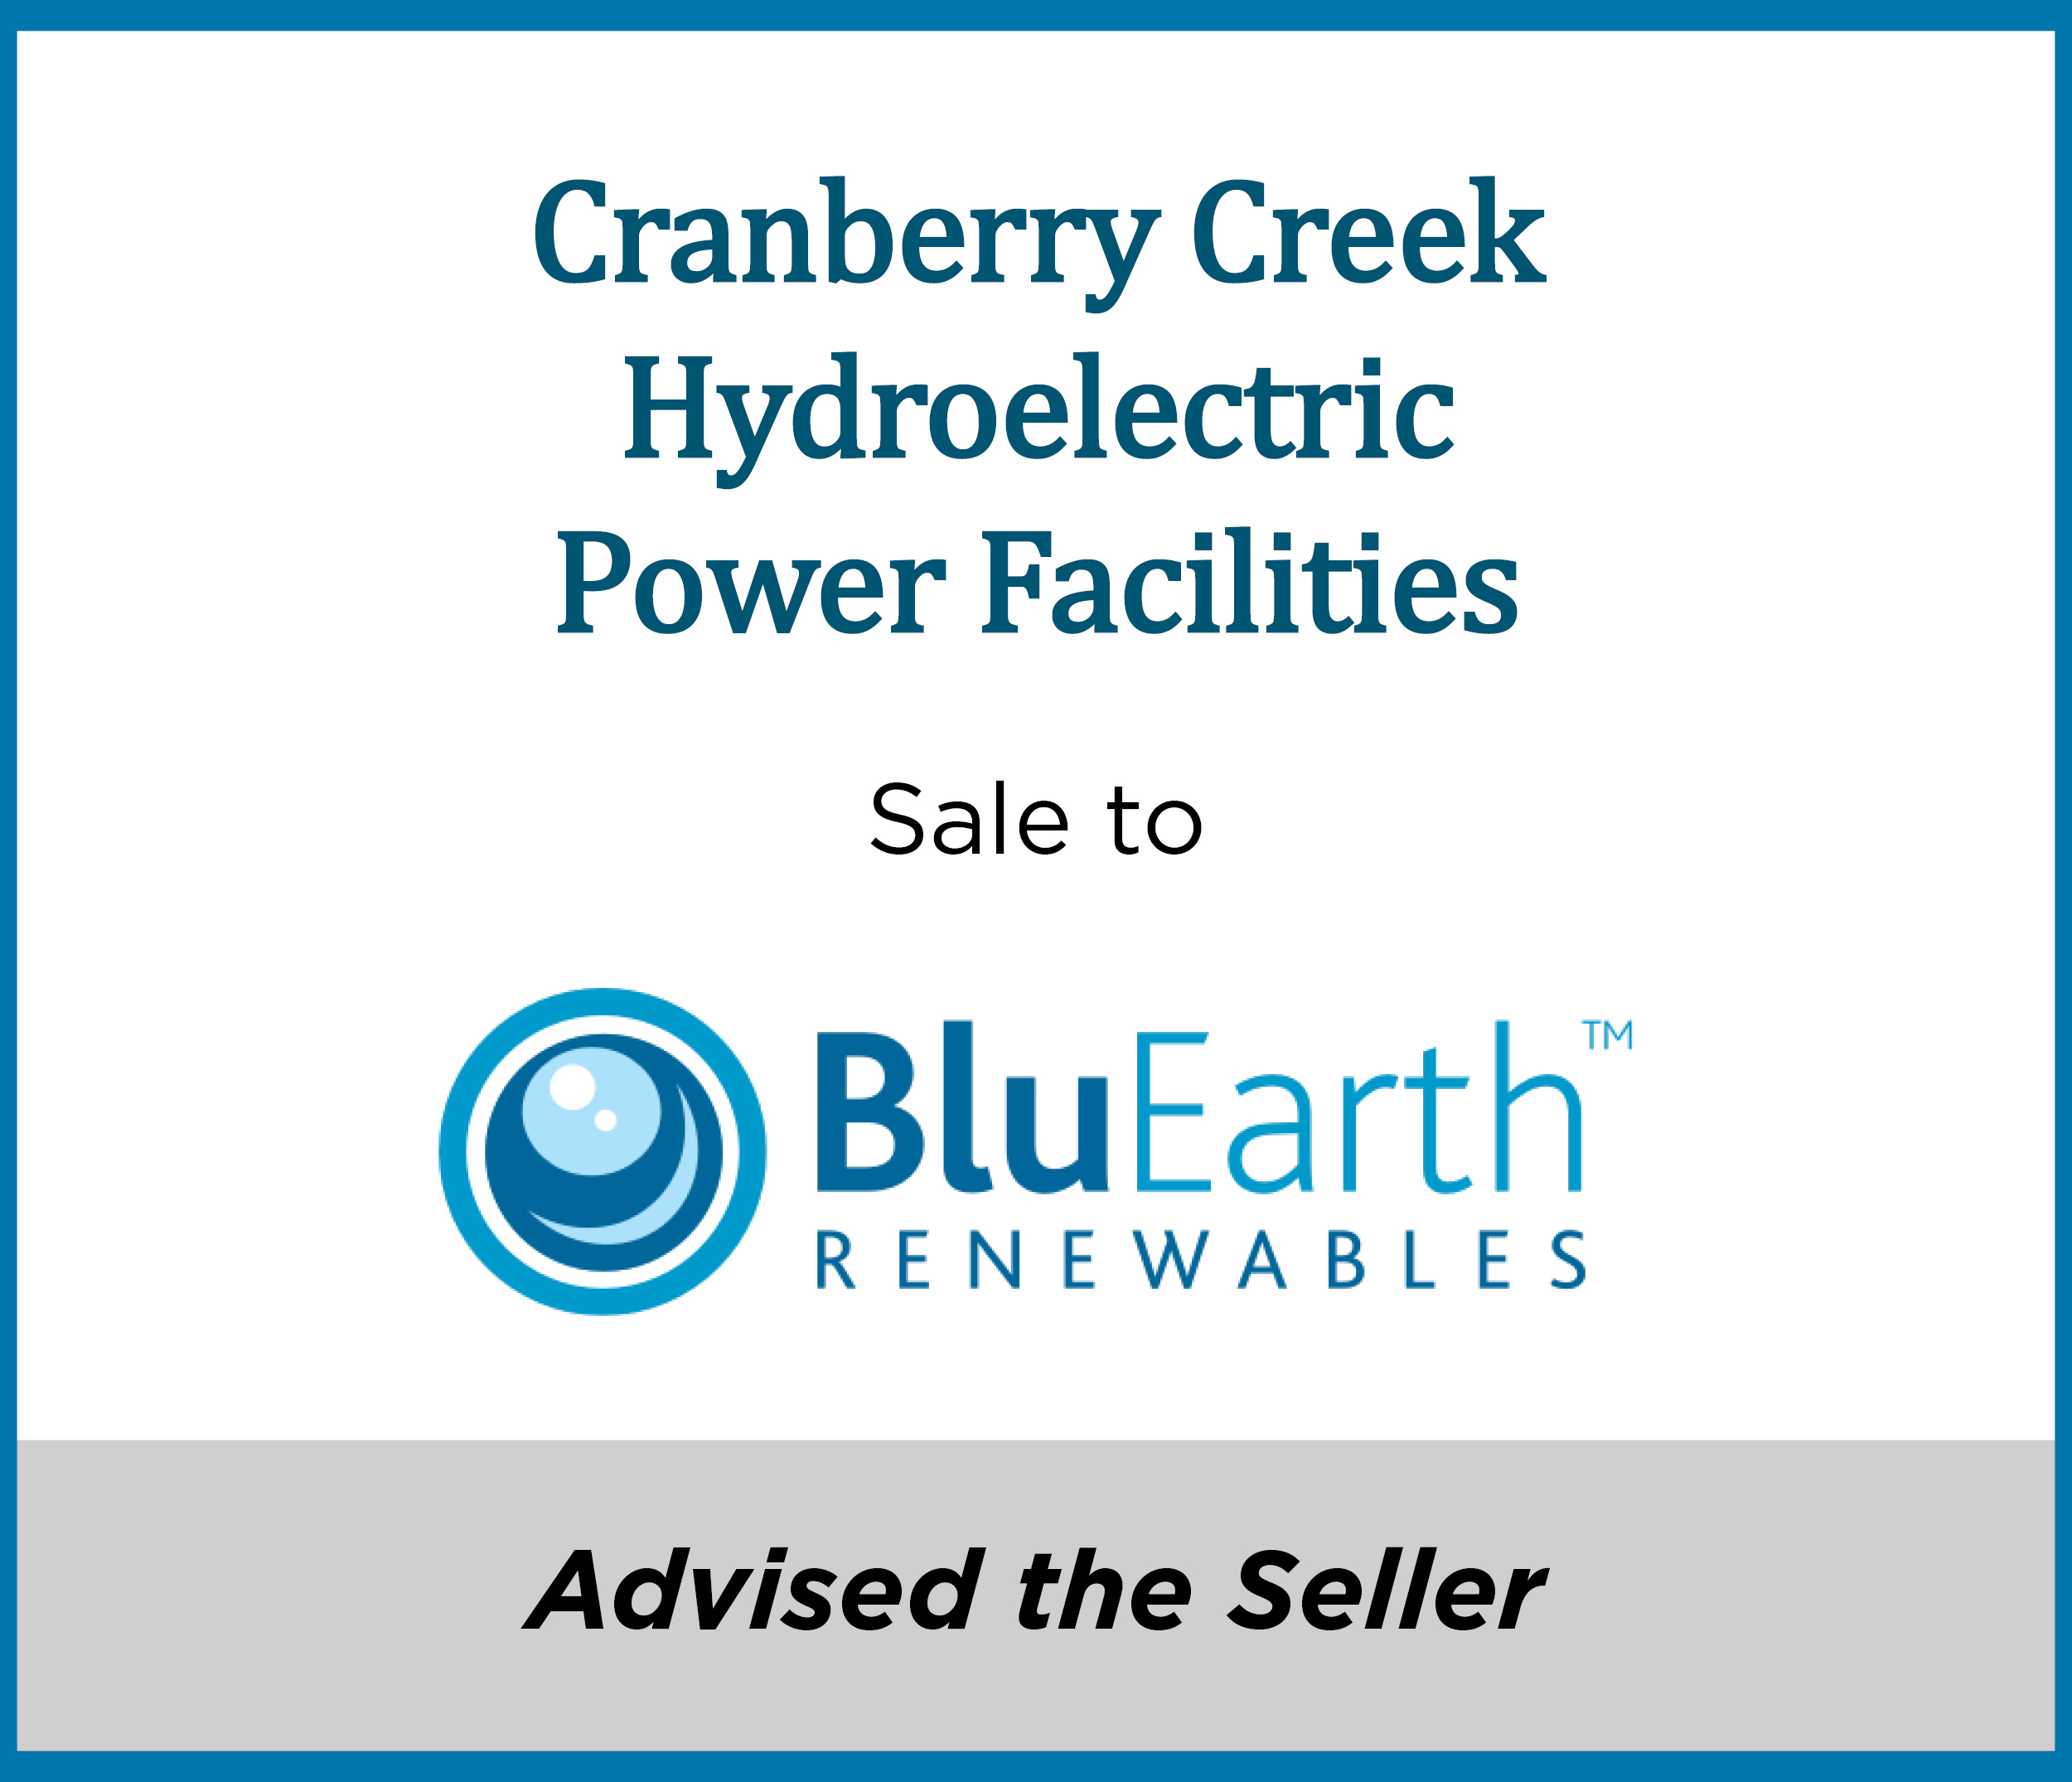 Cranberry Creek Hydroelectric Power Facilities; BluEarth Renewables